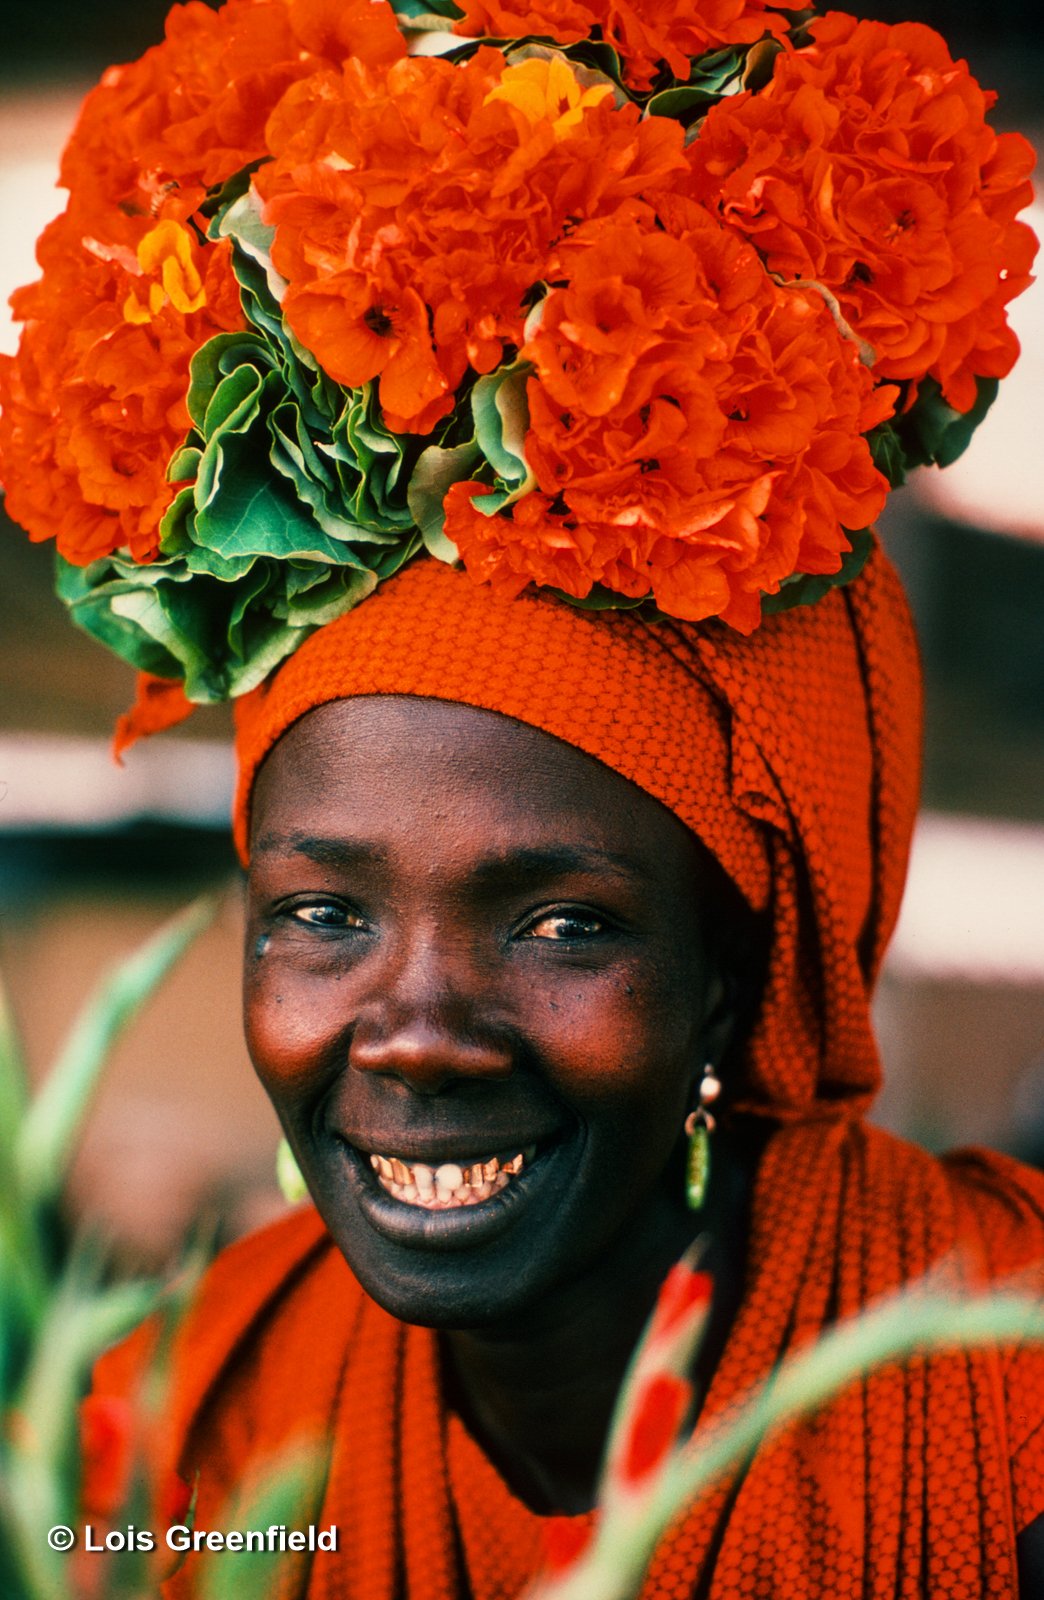 Woman with Floral Headdress, Senegal